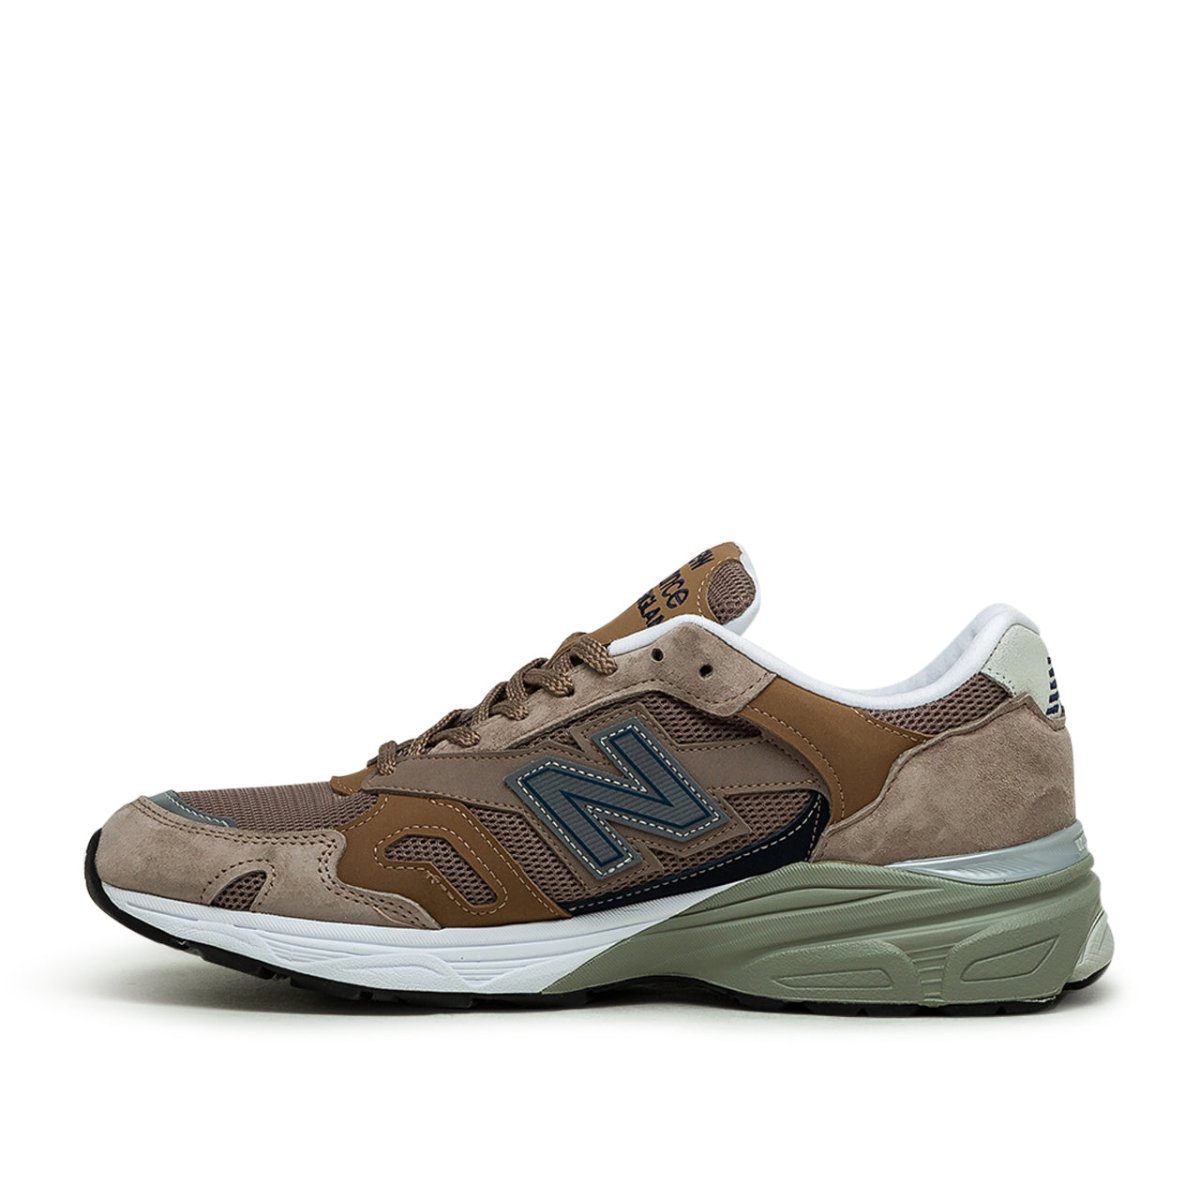 New Balance M920 SDS Desert Scape 'Made in England' (Brown / Beige) M920SDS  – Allike Store